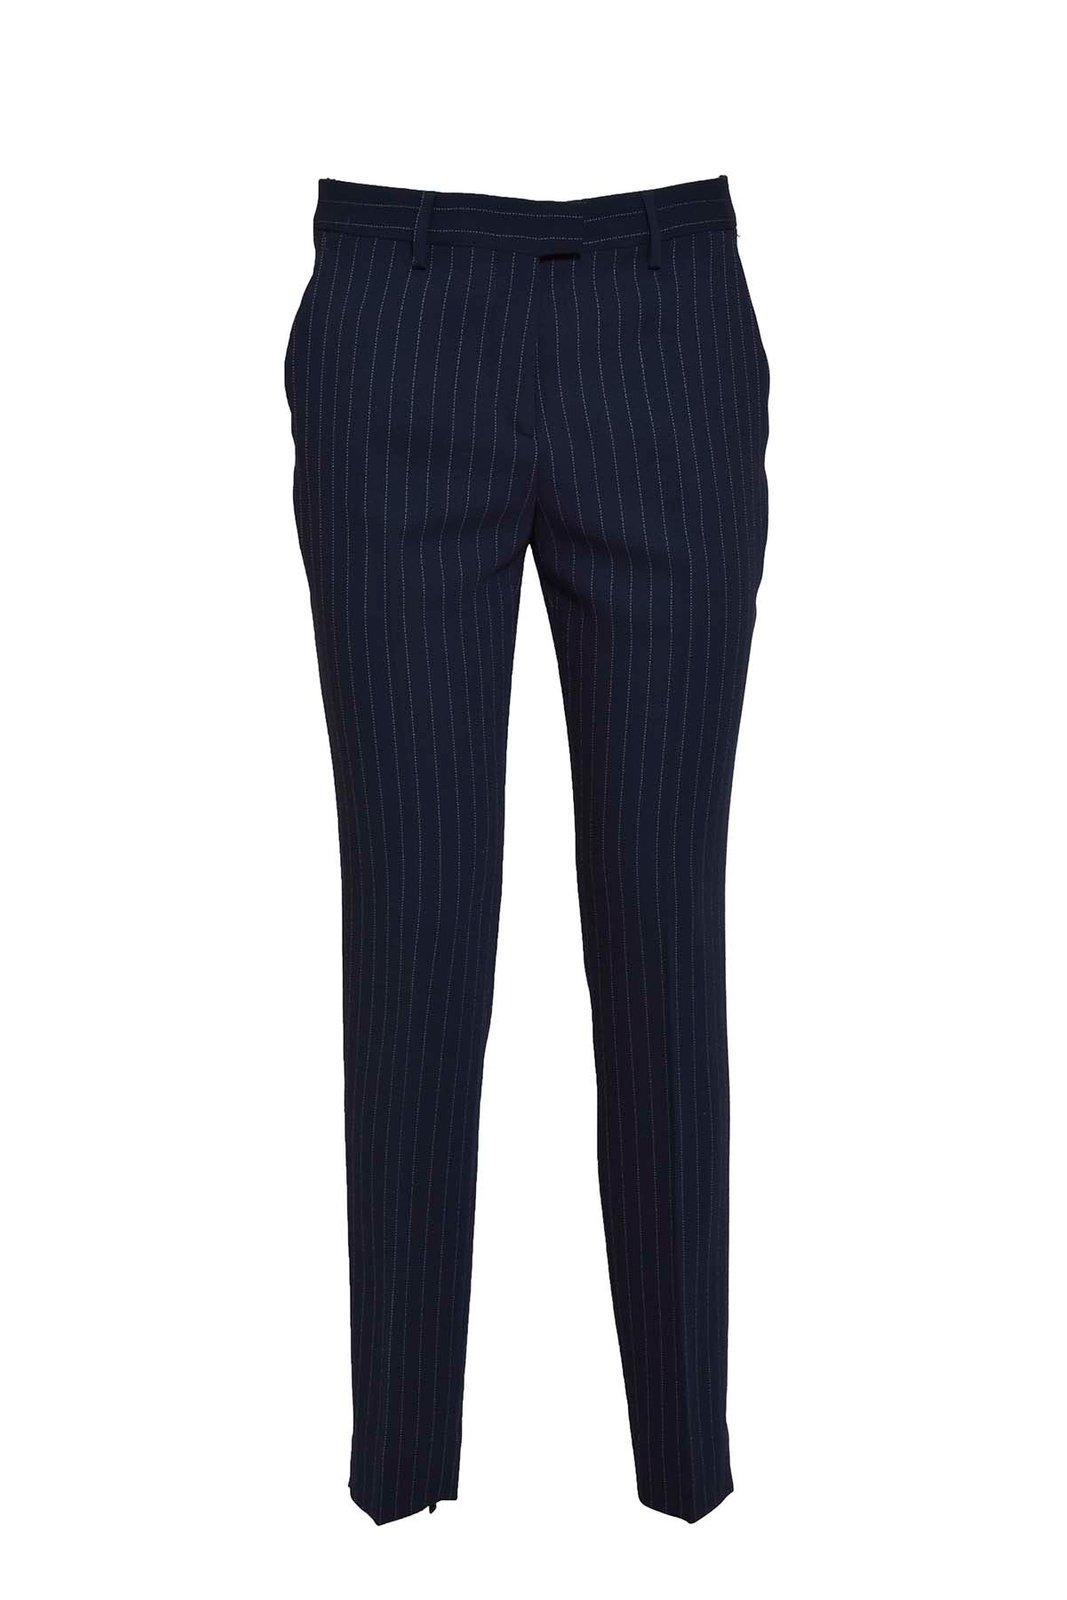 Etro Striped Tailored Trousers